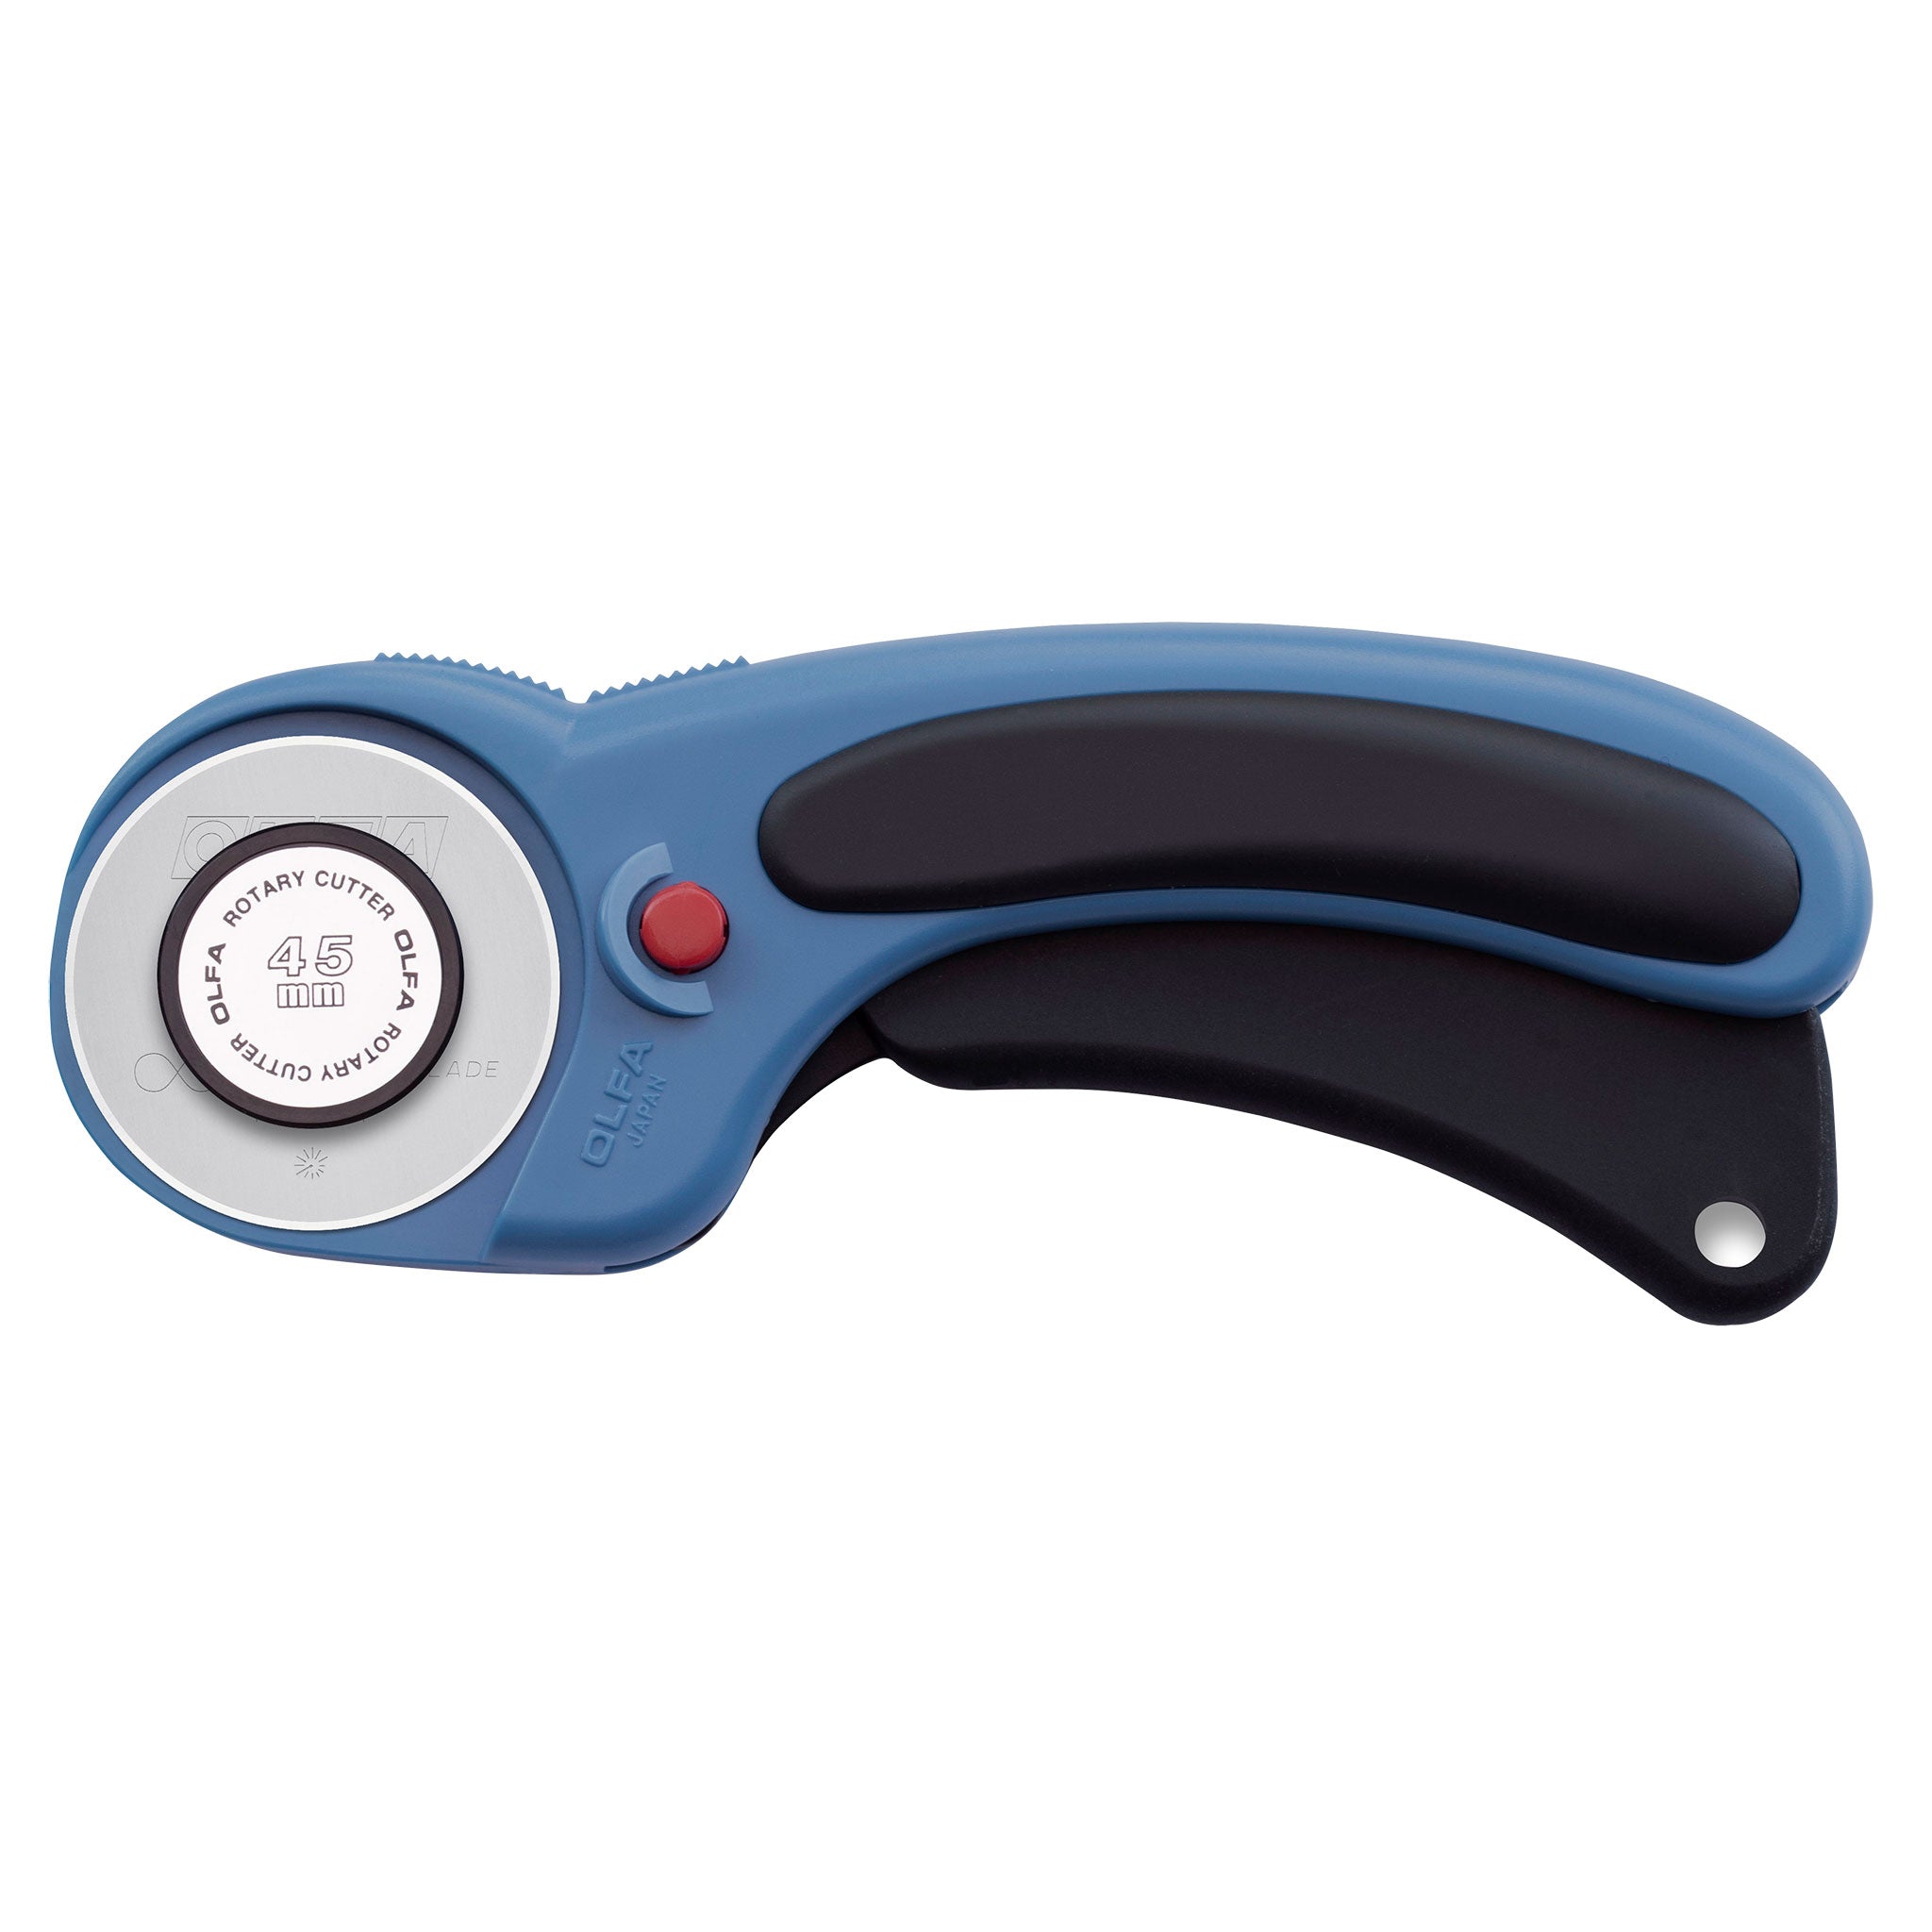 45mm RTY-2DX/PBL Ergonomic Rotary Cutter, Pacific Blue